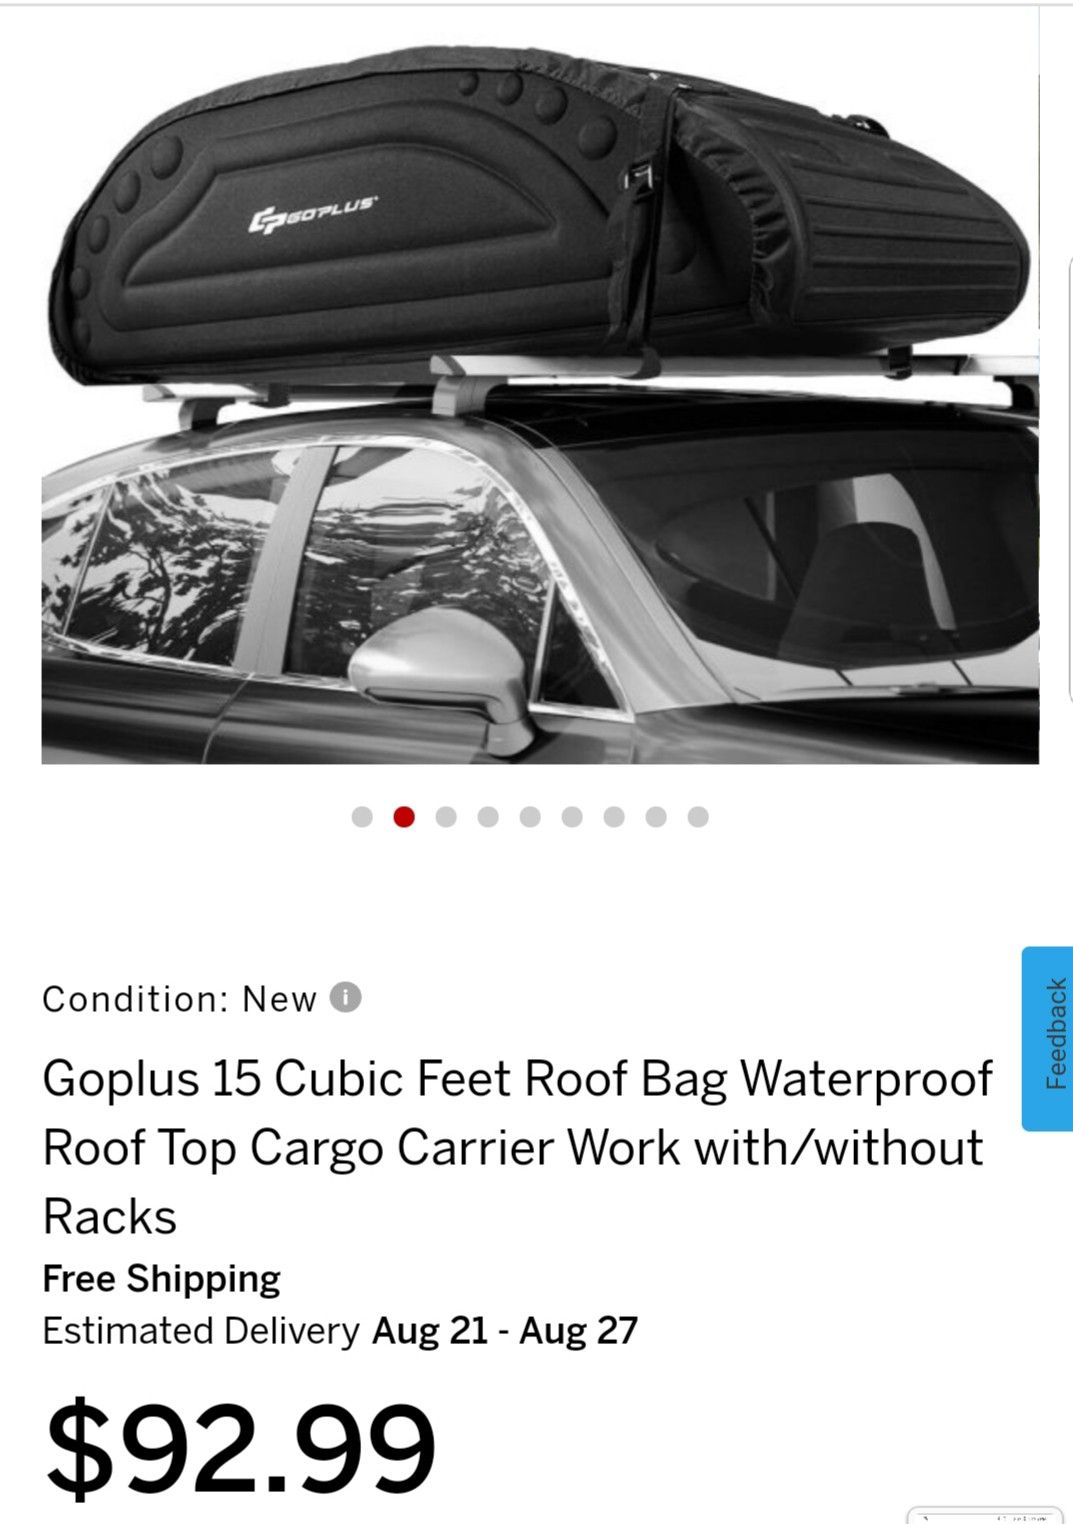 Goplus 15 Cubic Feet Roof Bag Waterproof Roof Top Cargo Carrier Work with/without Racks